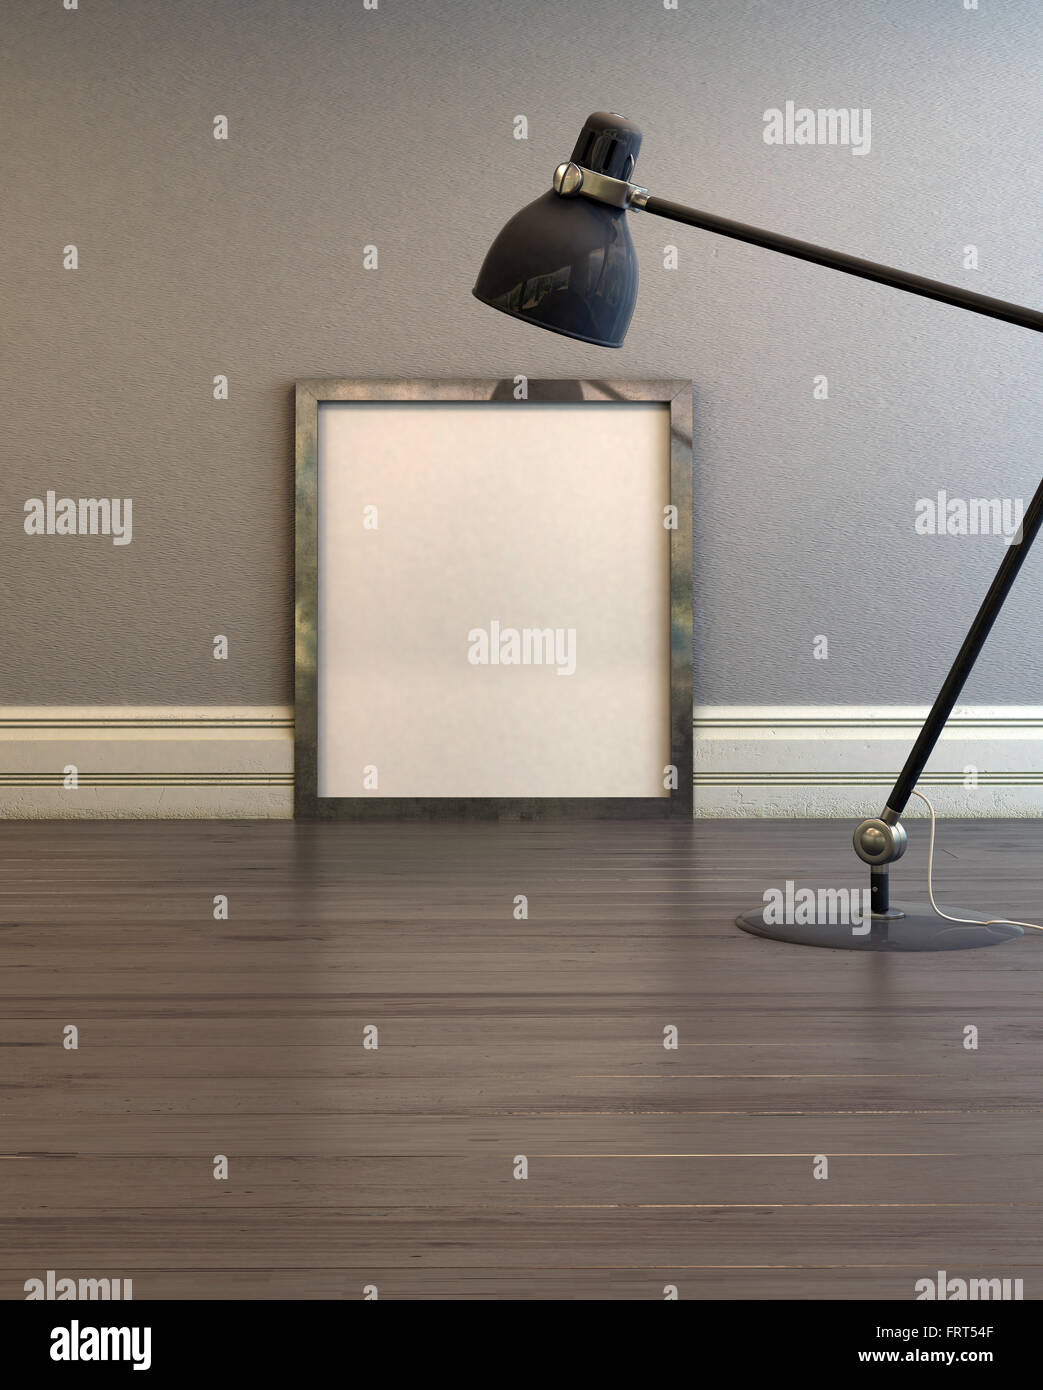 Empty Picture Frame Illuminated By An Anglepoise Lamp Standing On